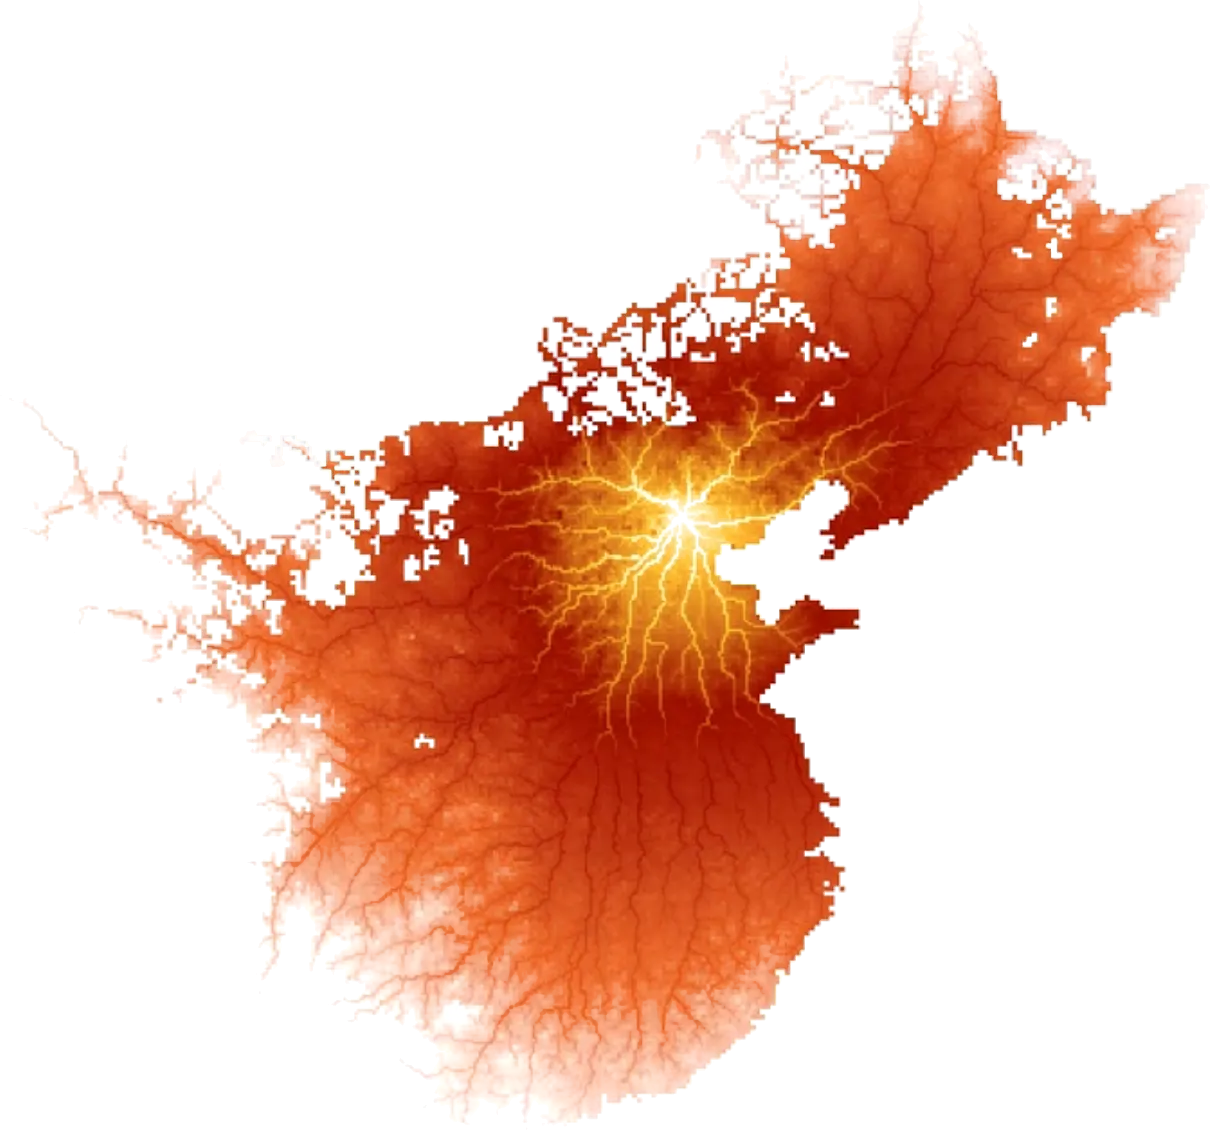 Isochrone map of China